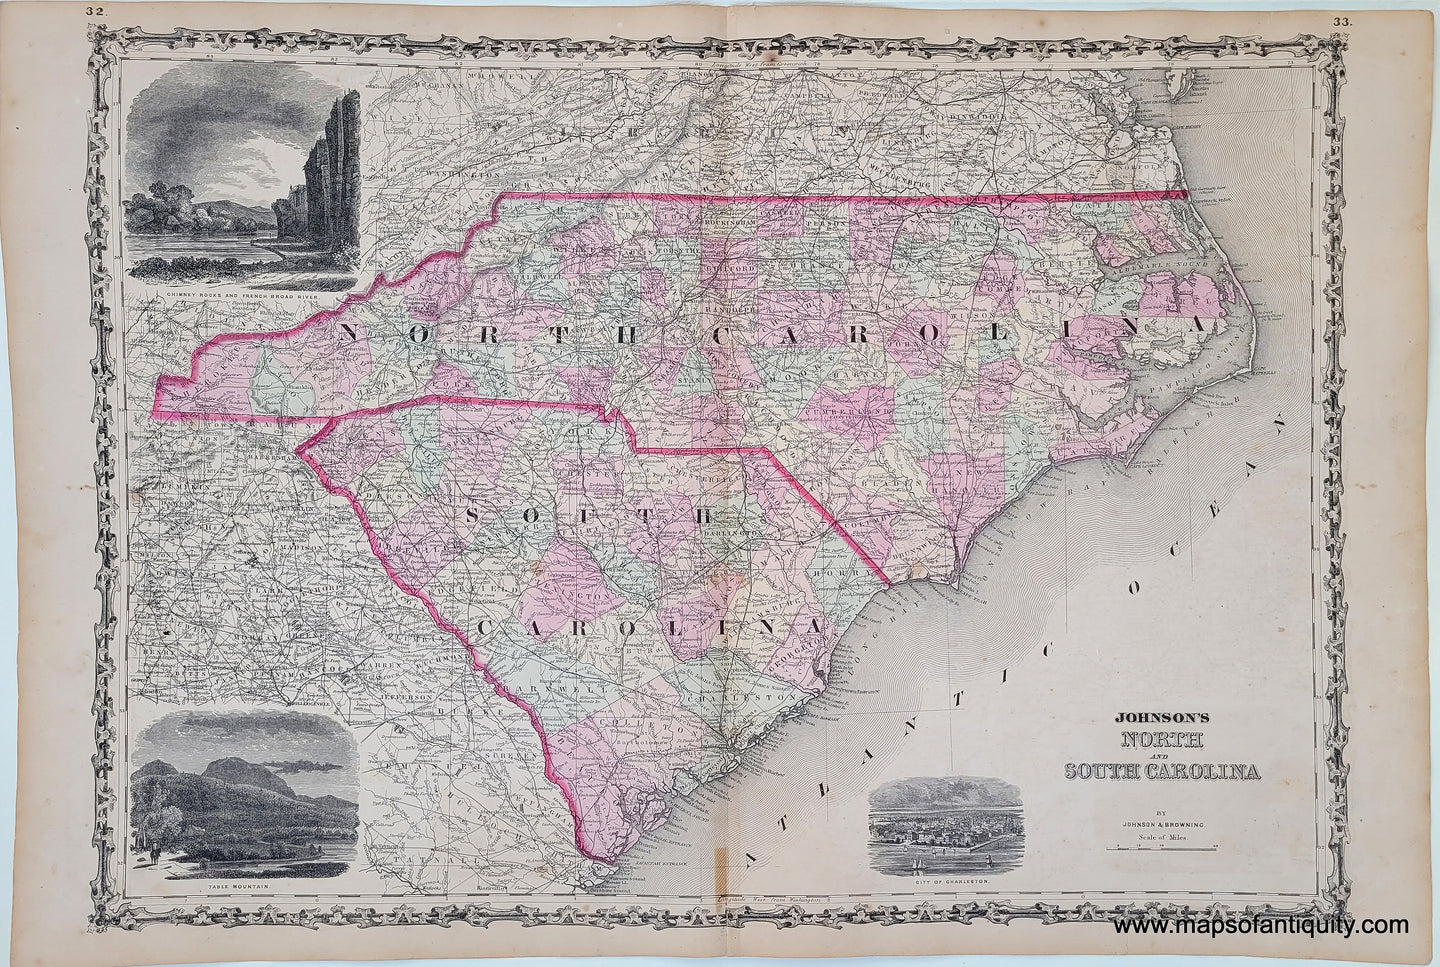 Maps-Antiquity-Antique-Map-United-States-Johnson-Browning-1860-1860s-1800s-19th-Century-Johnson's-North-Carolina-South-Carolina-Fort-Sumter-Charleston-Plan-Chimney-Rocks-French-Broad-River-Table-Mountain